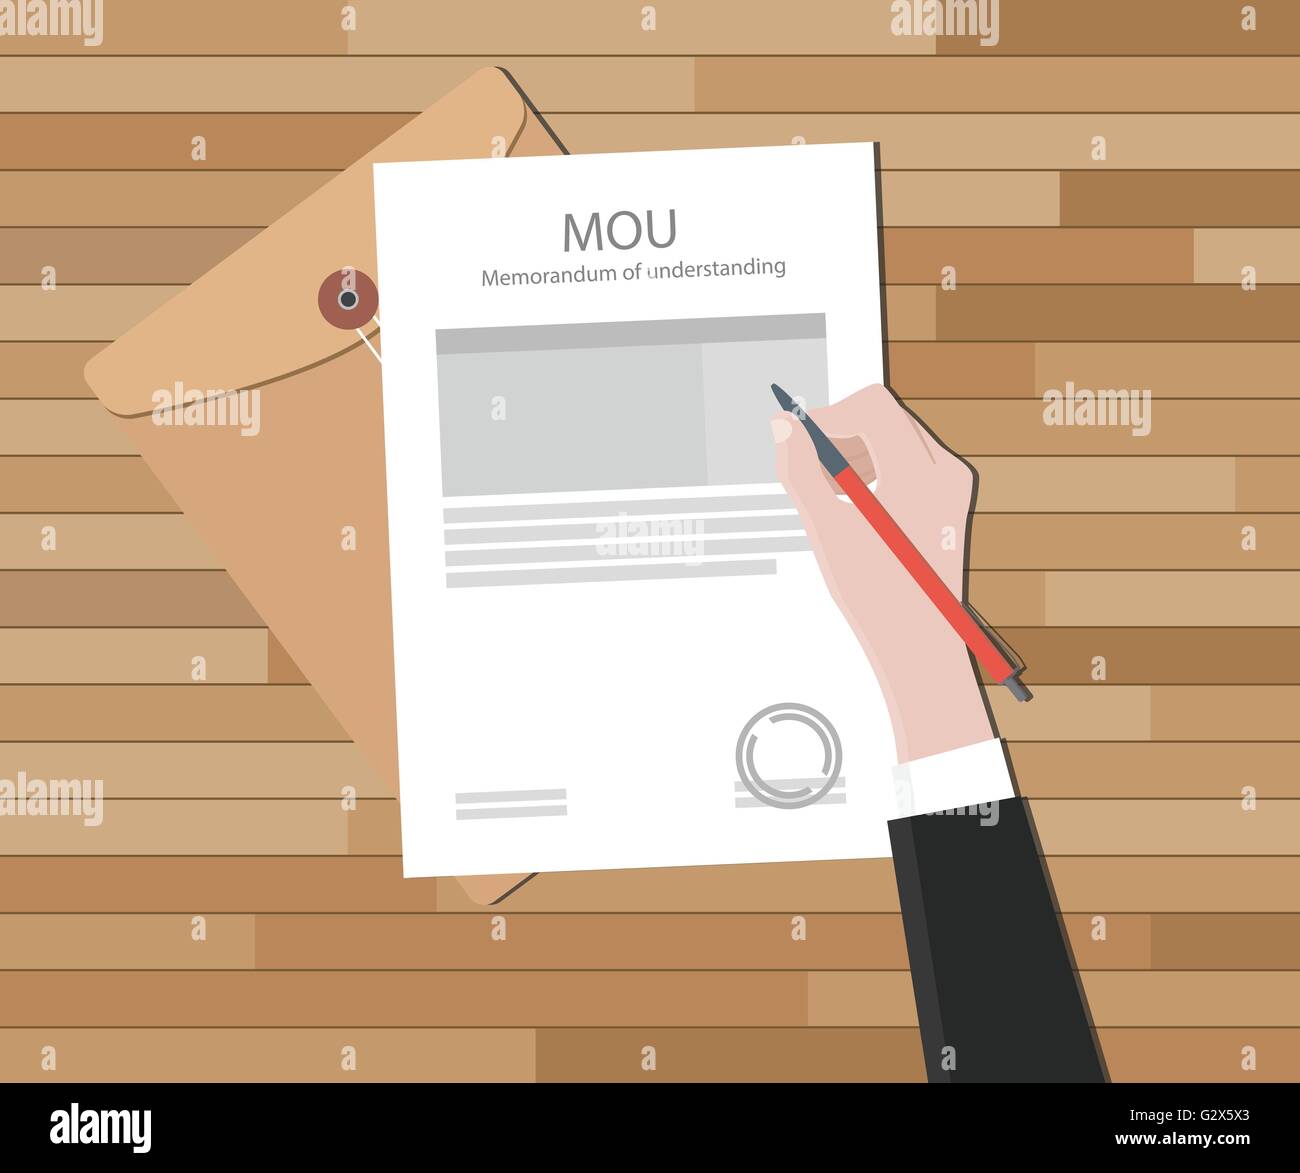 mou memorandum of understanding text on document hand signing on top of wood table vector graphic Stock Vector